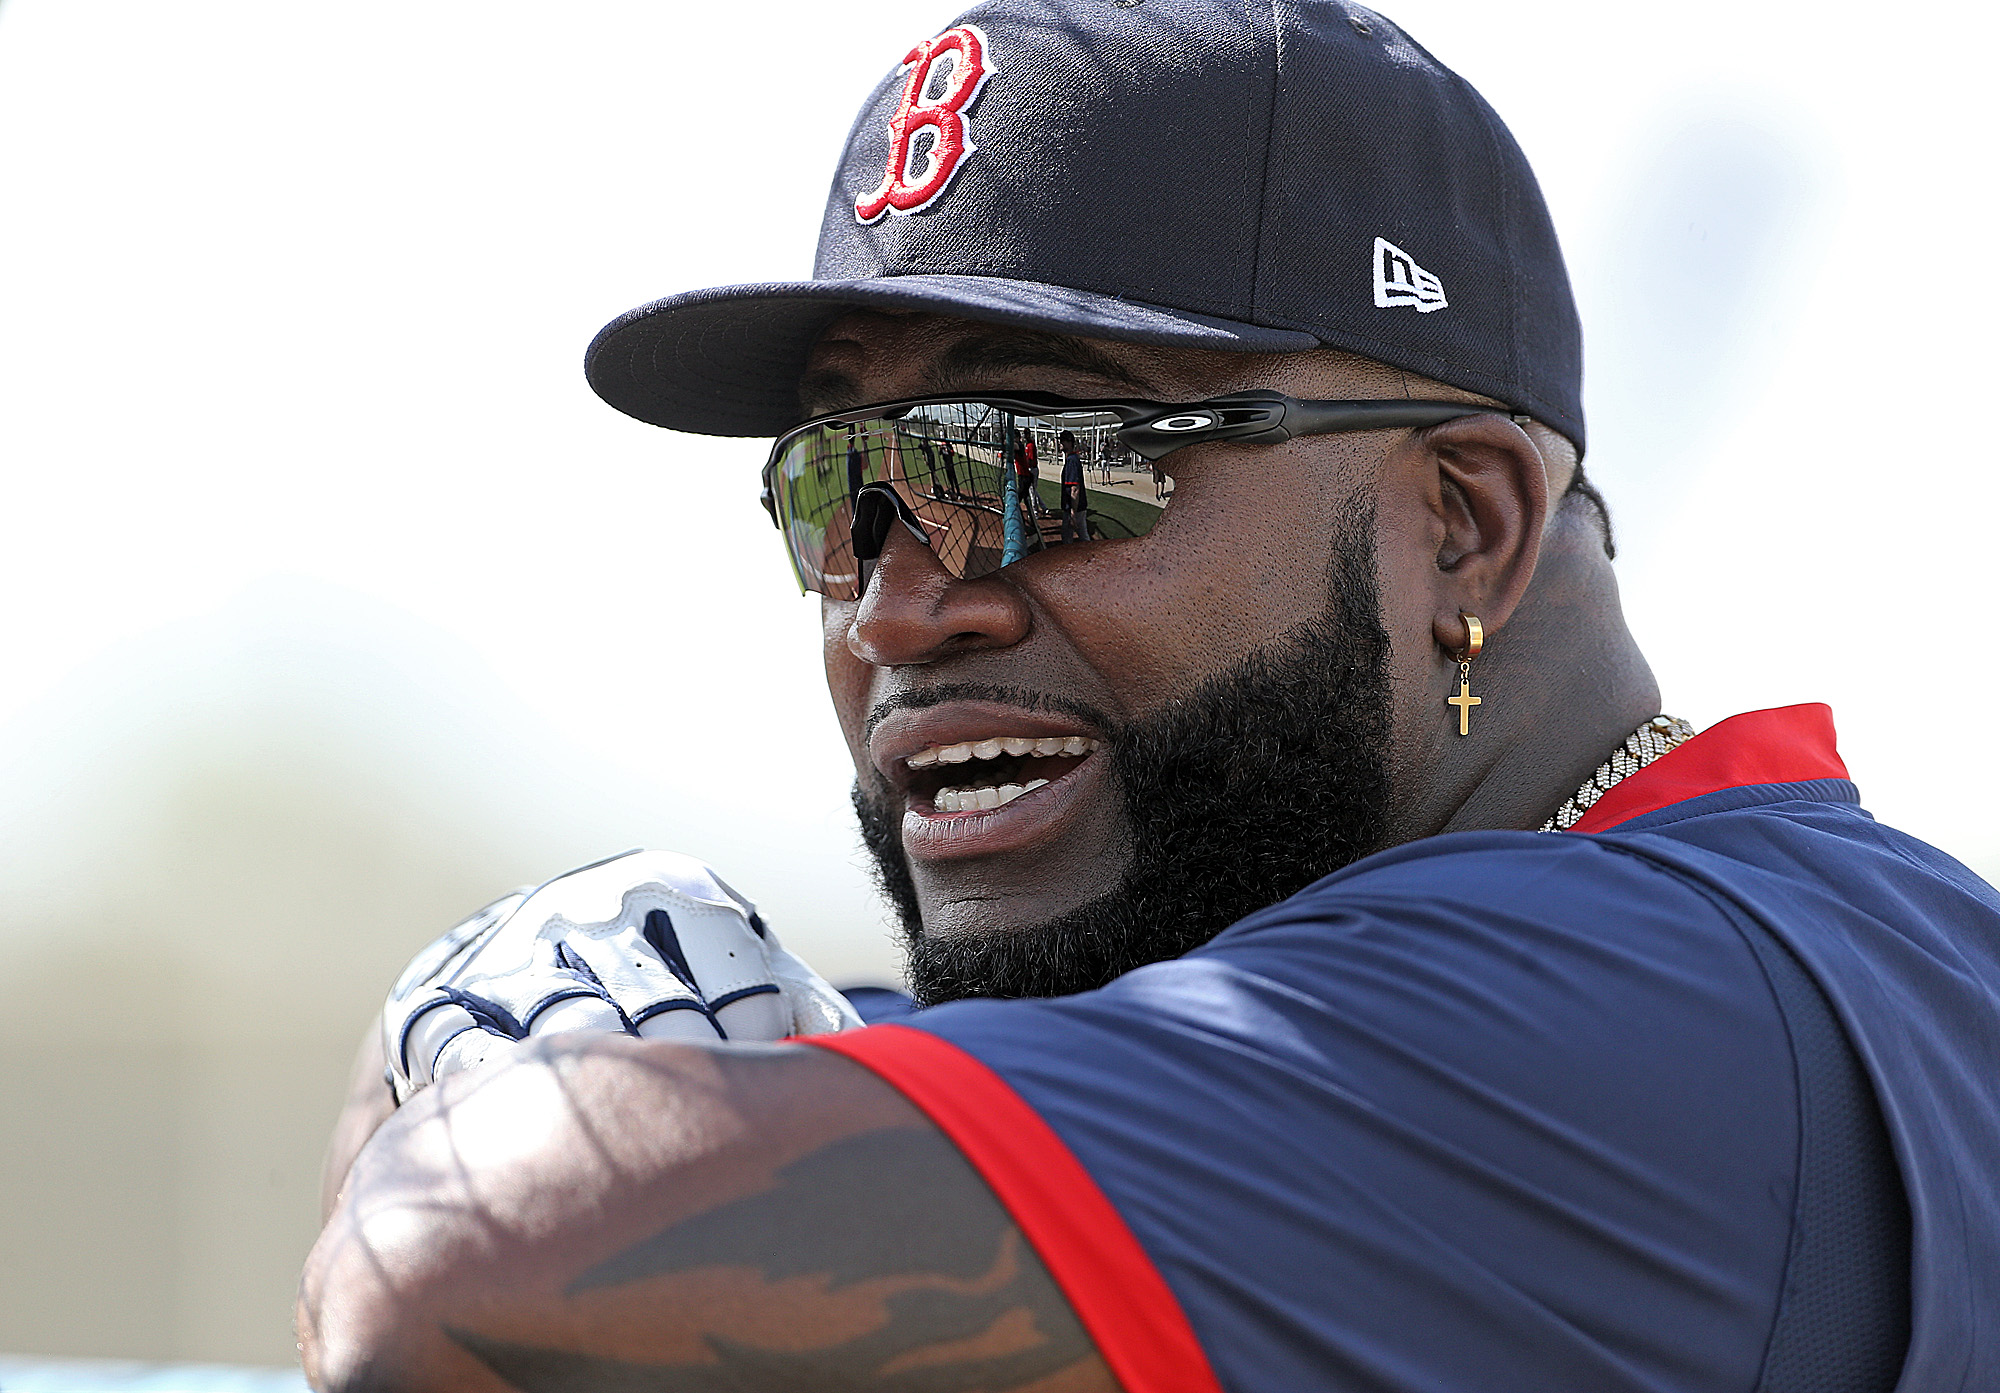 Former Red Sox great David Ortiz leans on the batting cage.